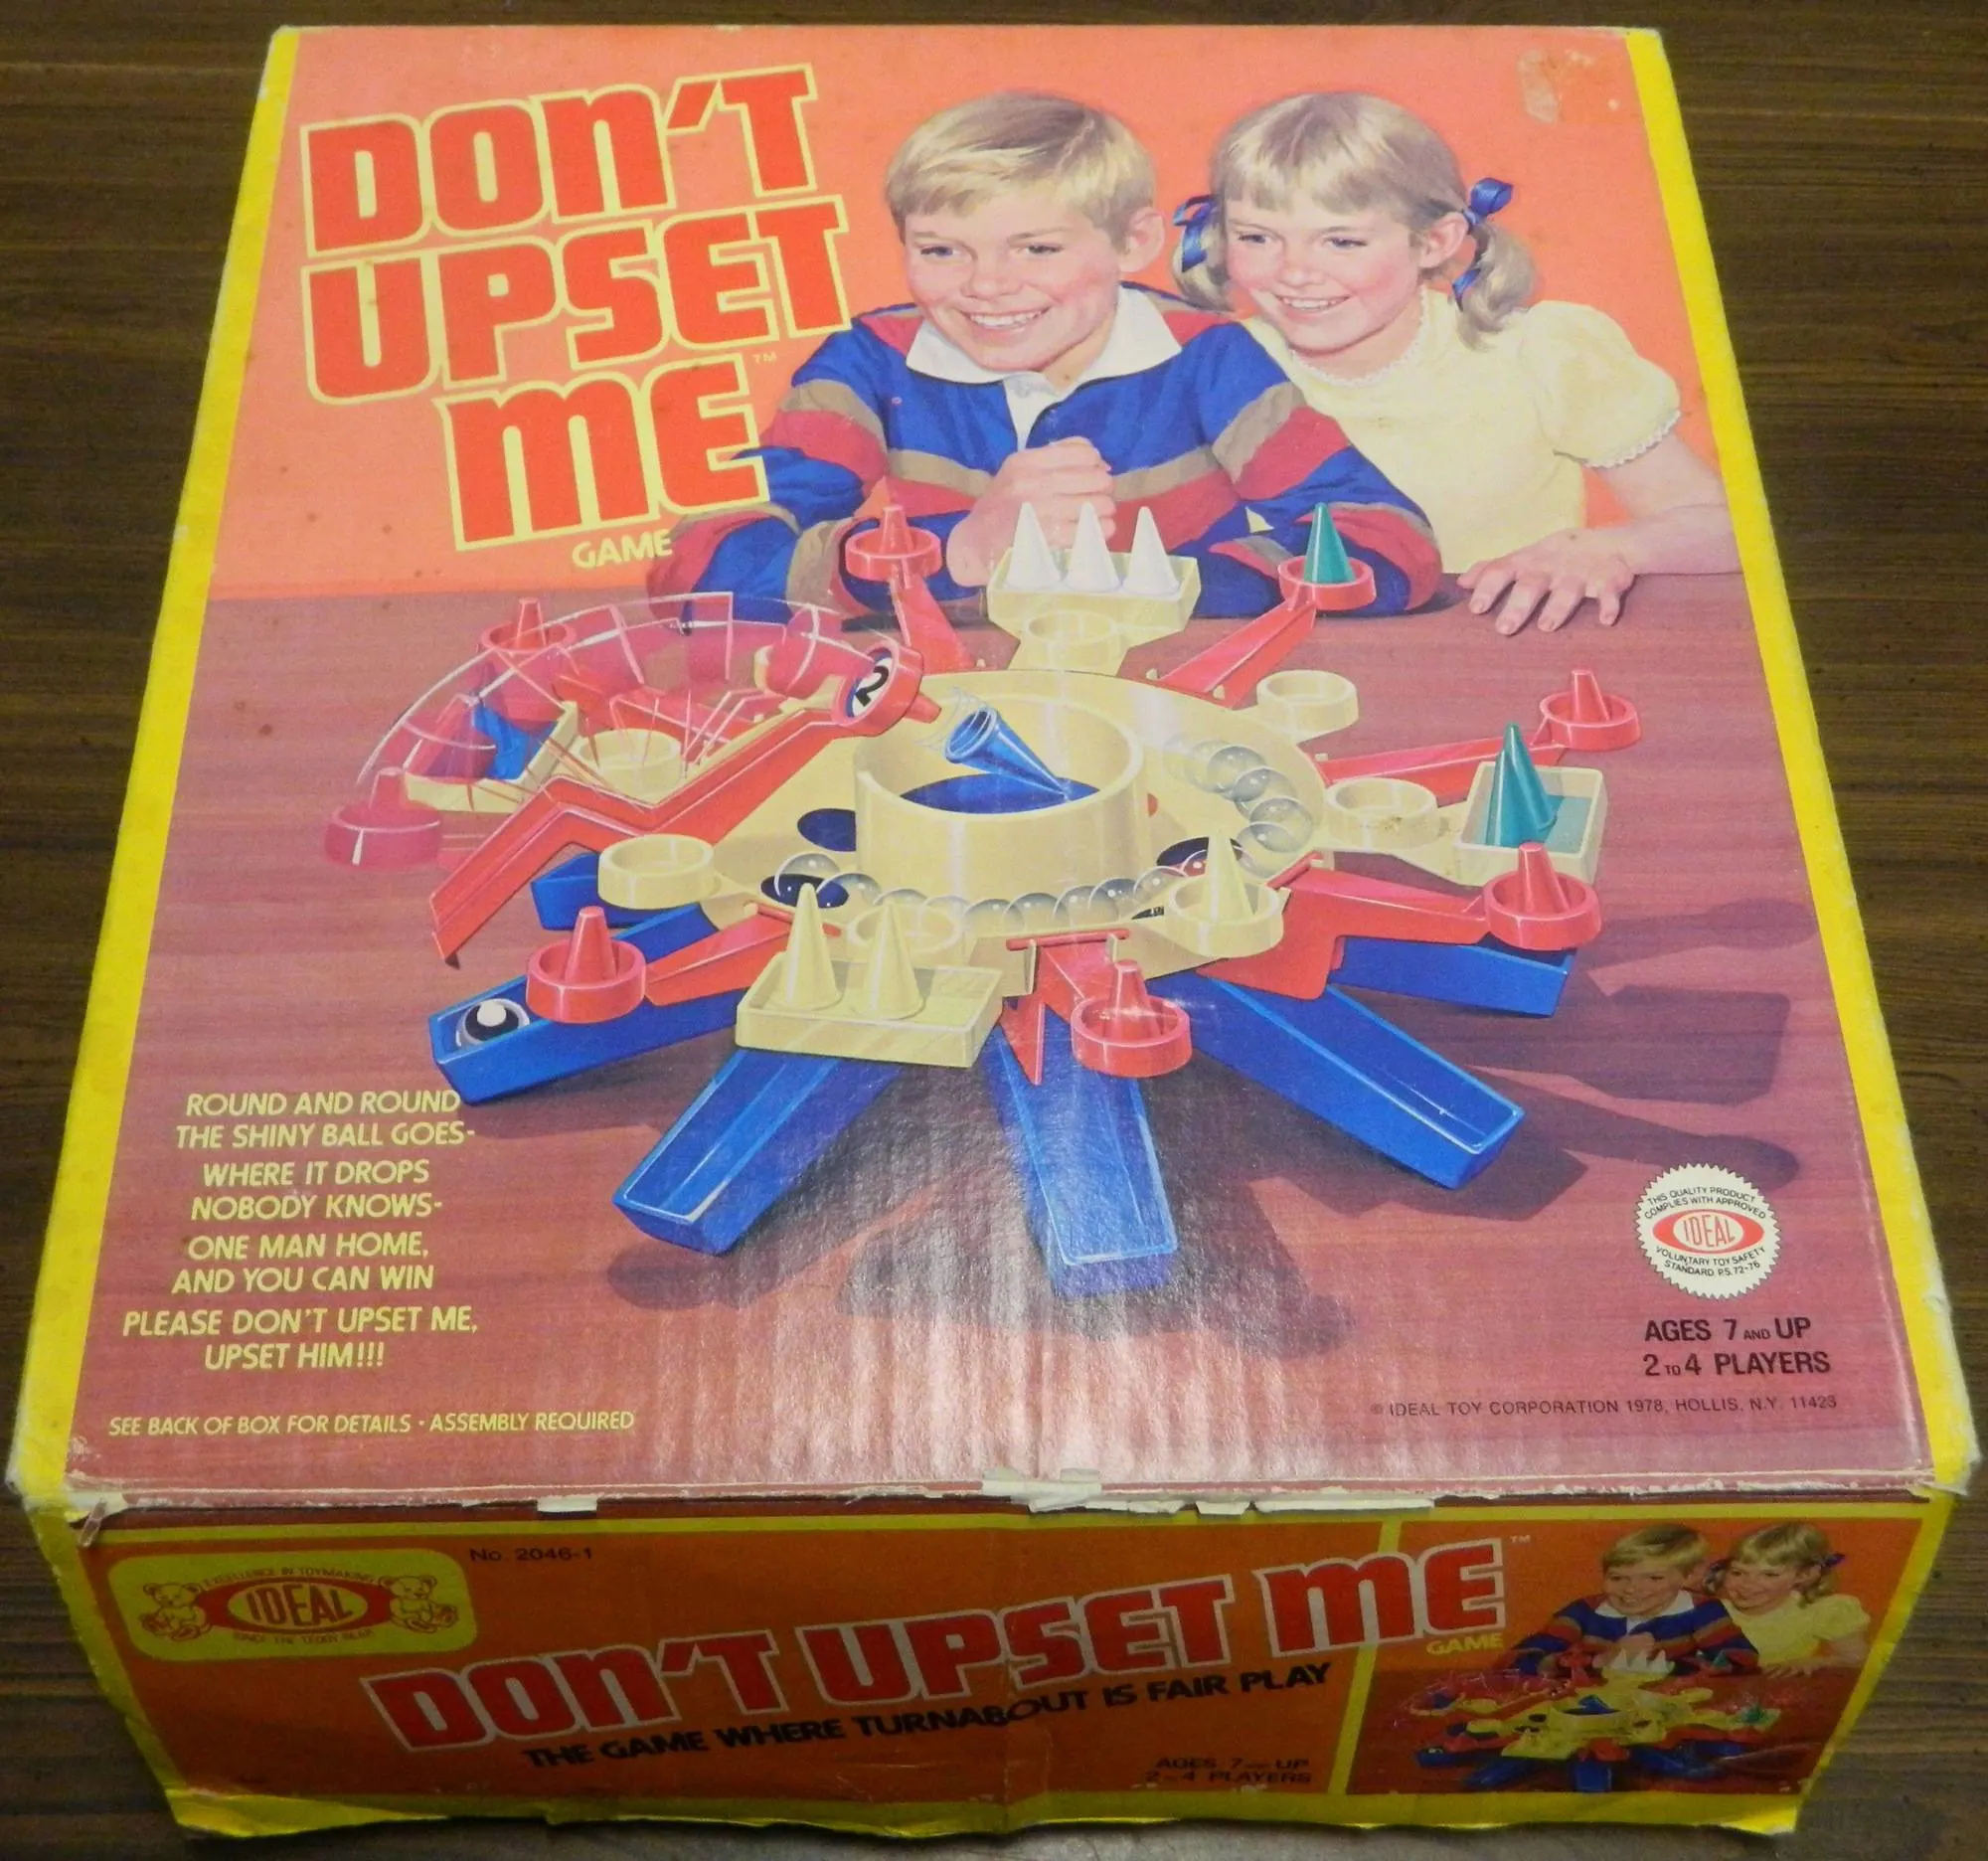 Box for Don't Upset Me